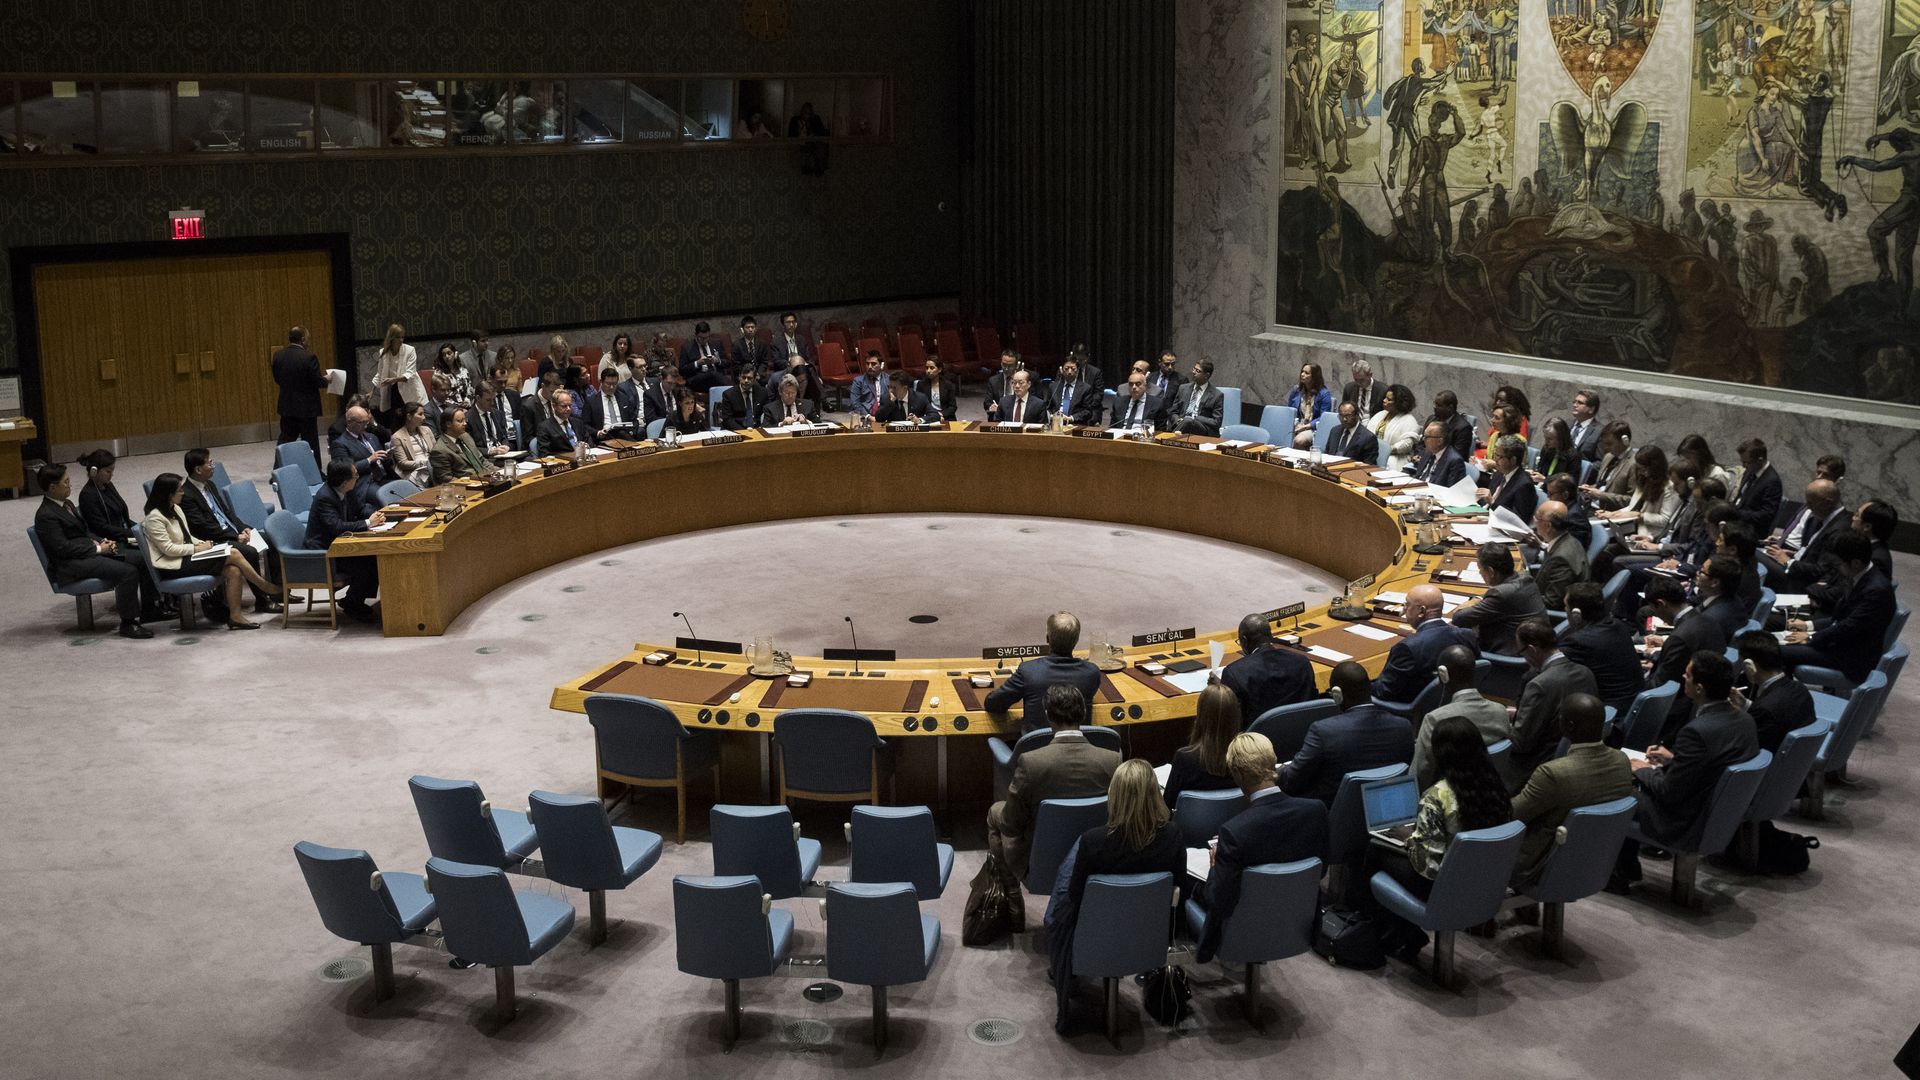 United Nations Security Council: Photo by Drew Angerer/Getty Images